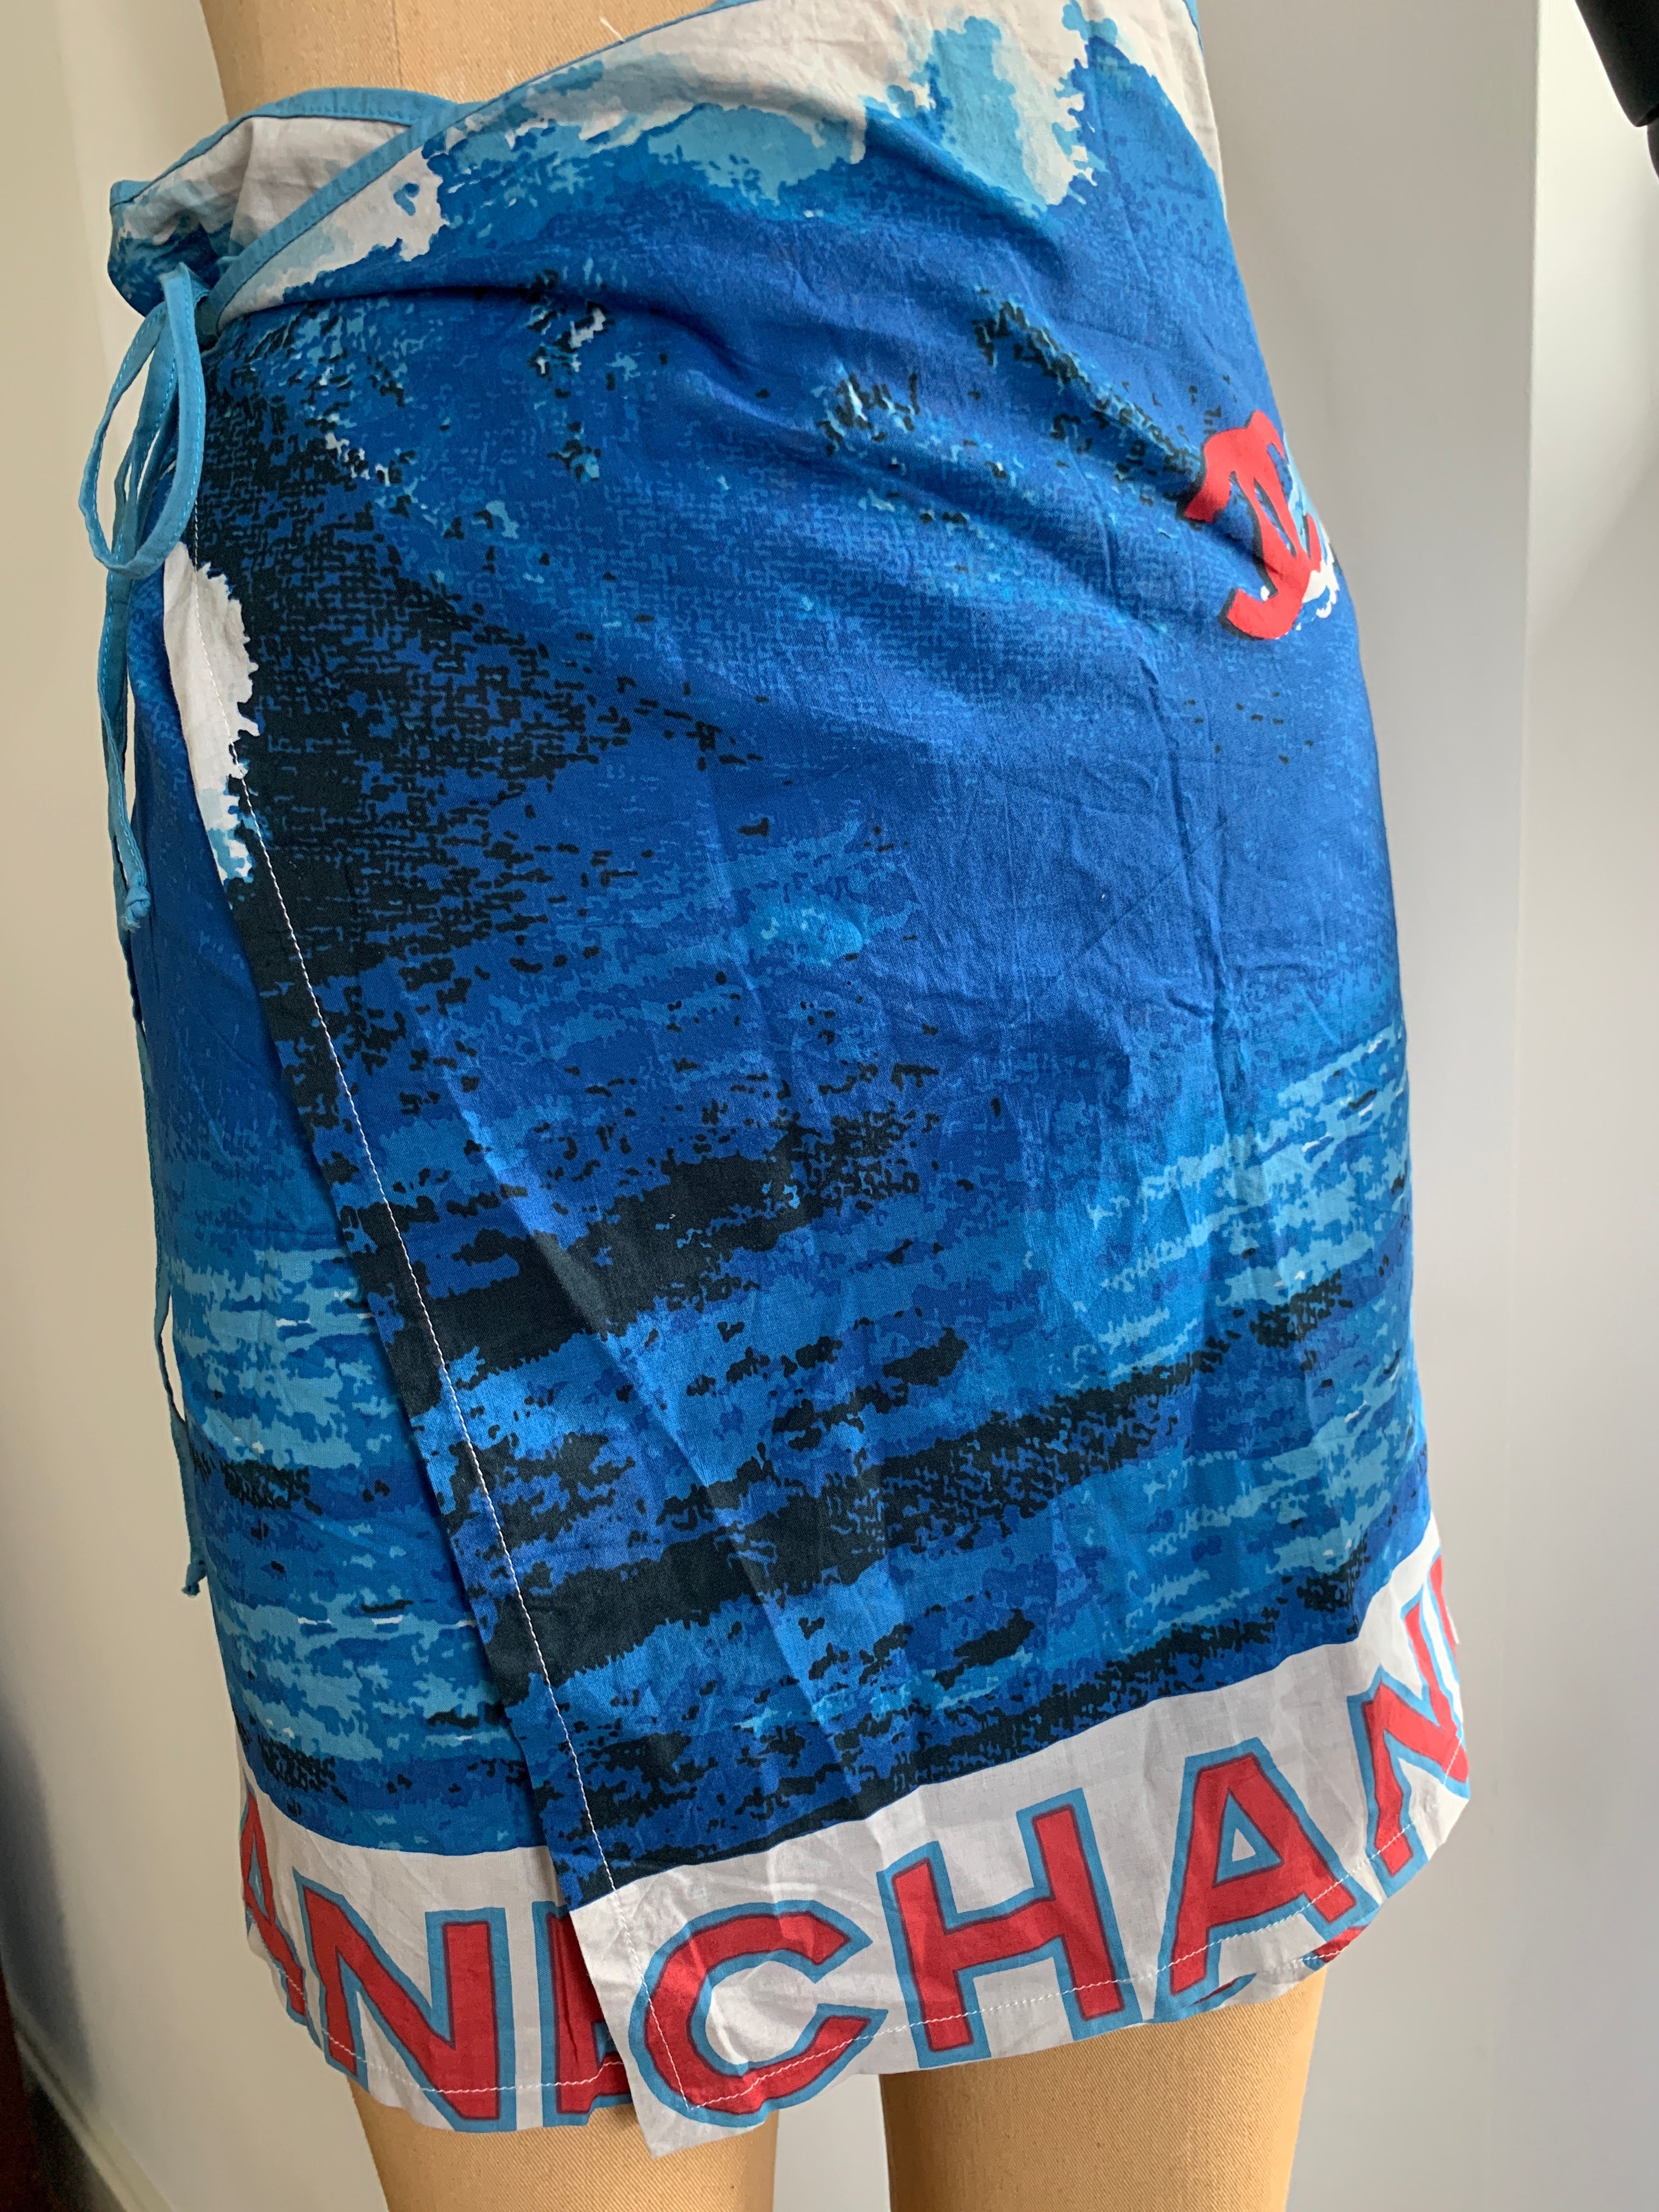 Chanel Surf Sarong ( as recently seen on Kylie Jenner)